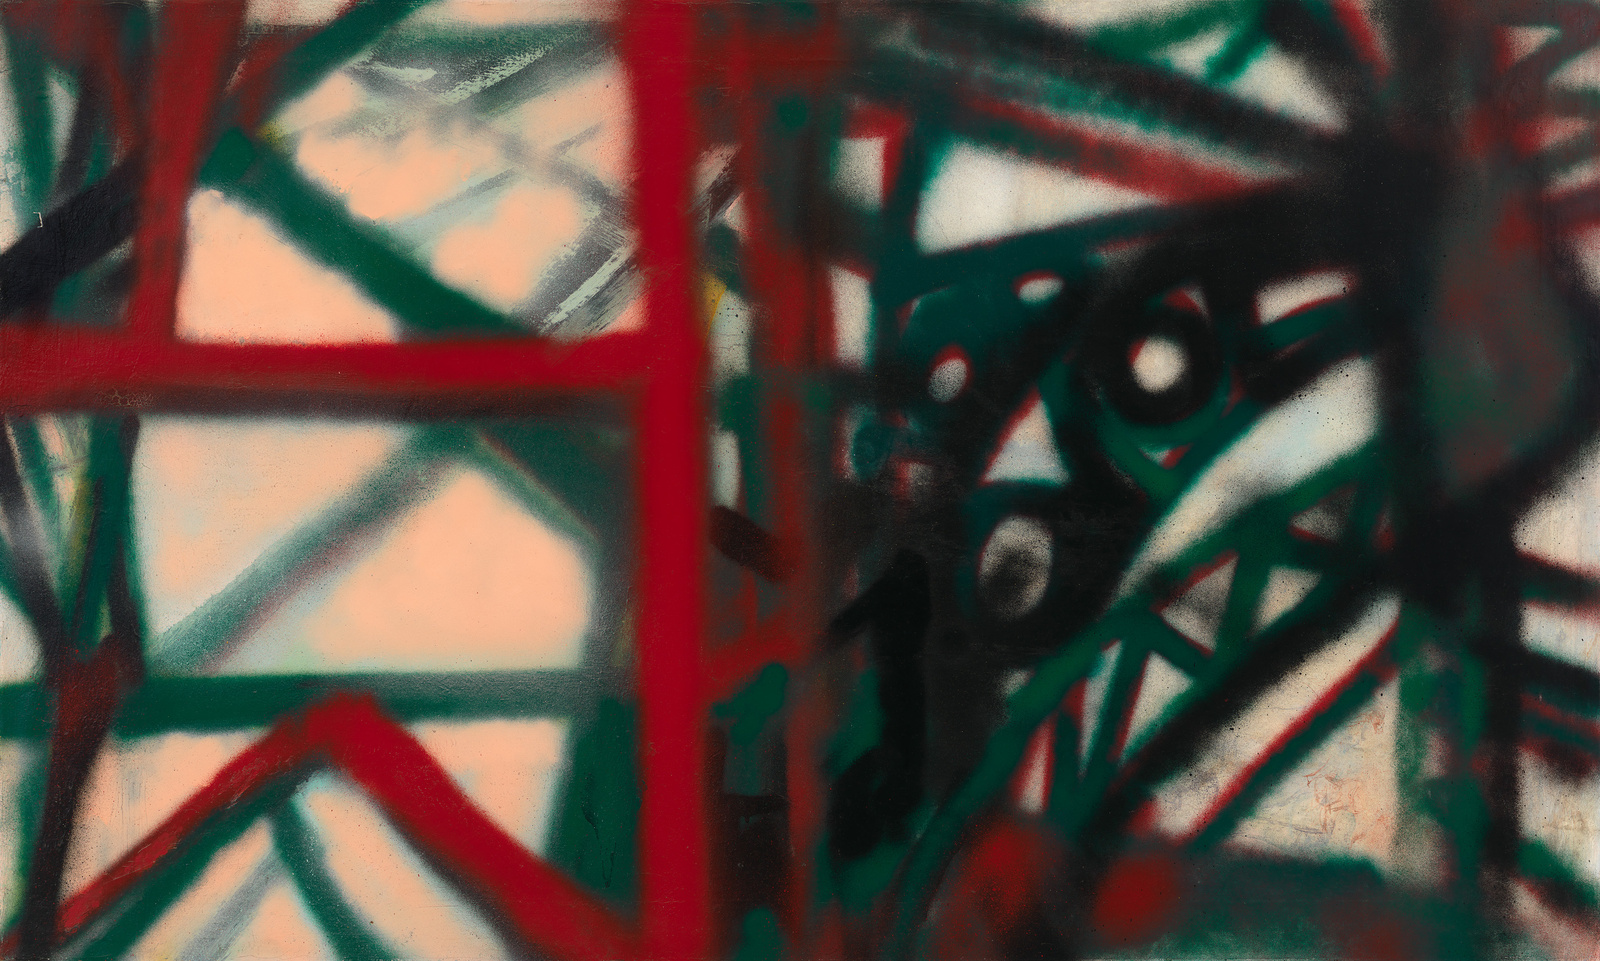 Heavy and soft red, green, and black lines intersect to form dense and sparse geometric shapes, the colors smearing together at different points.